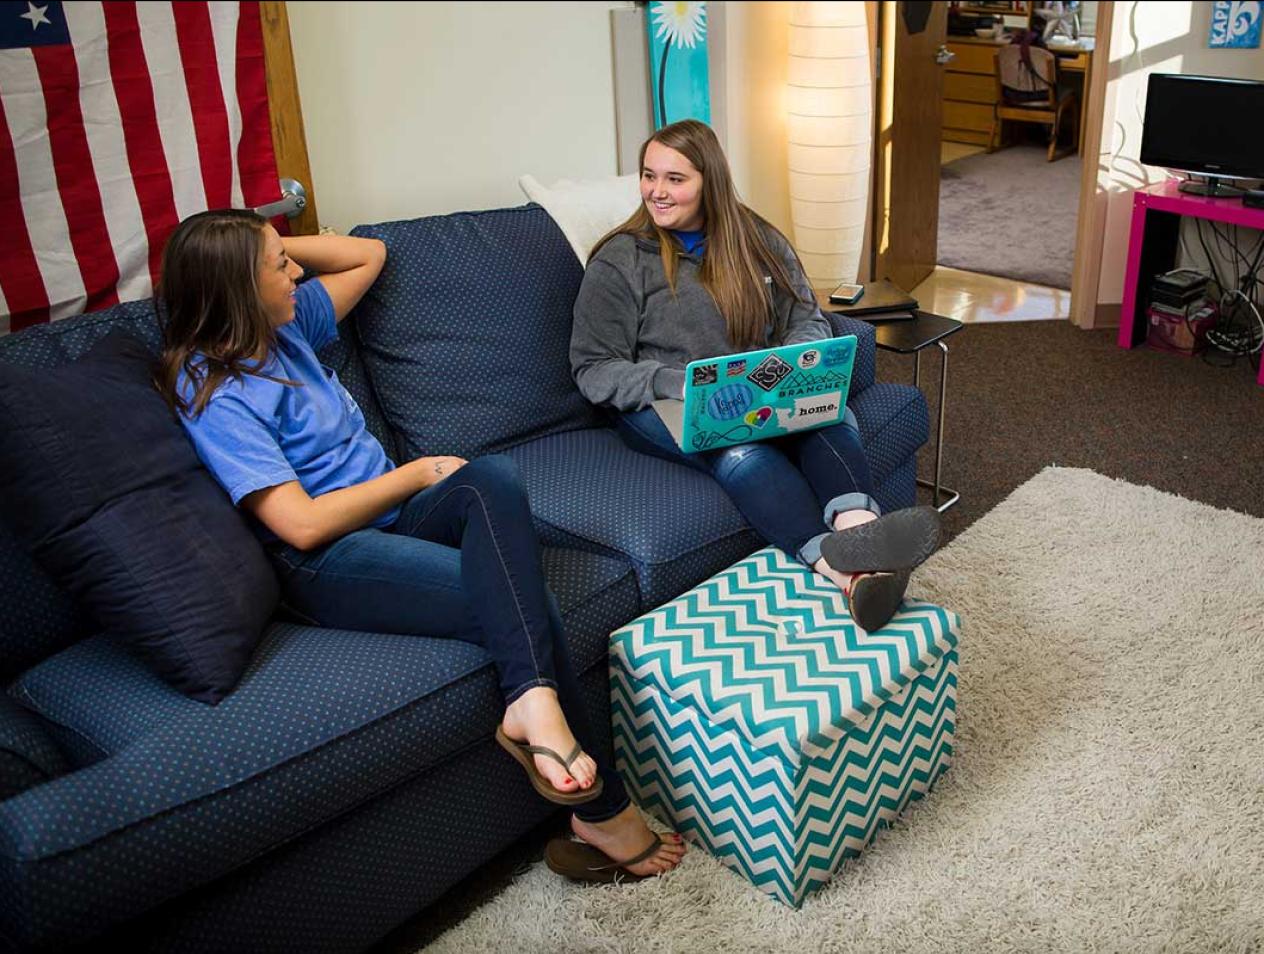 Friends studying in living room setting